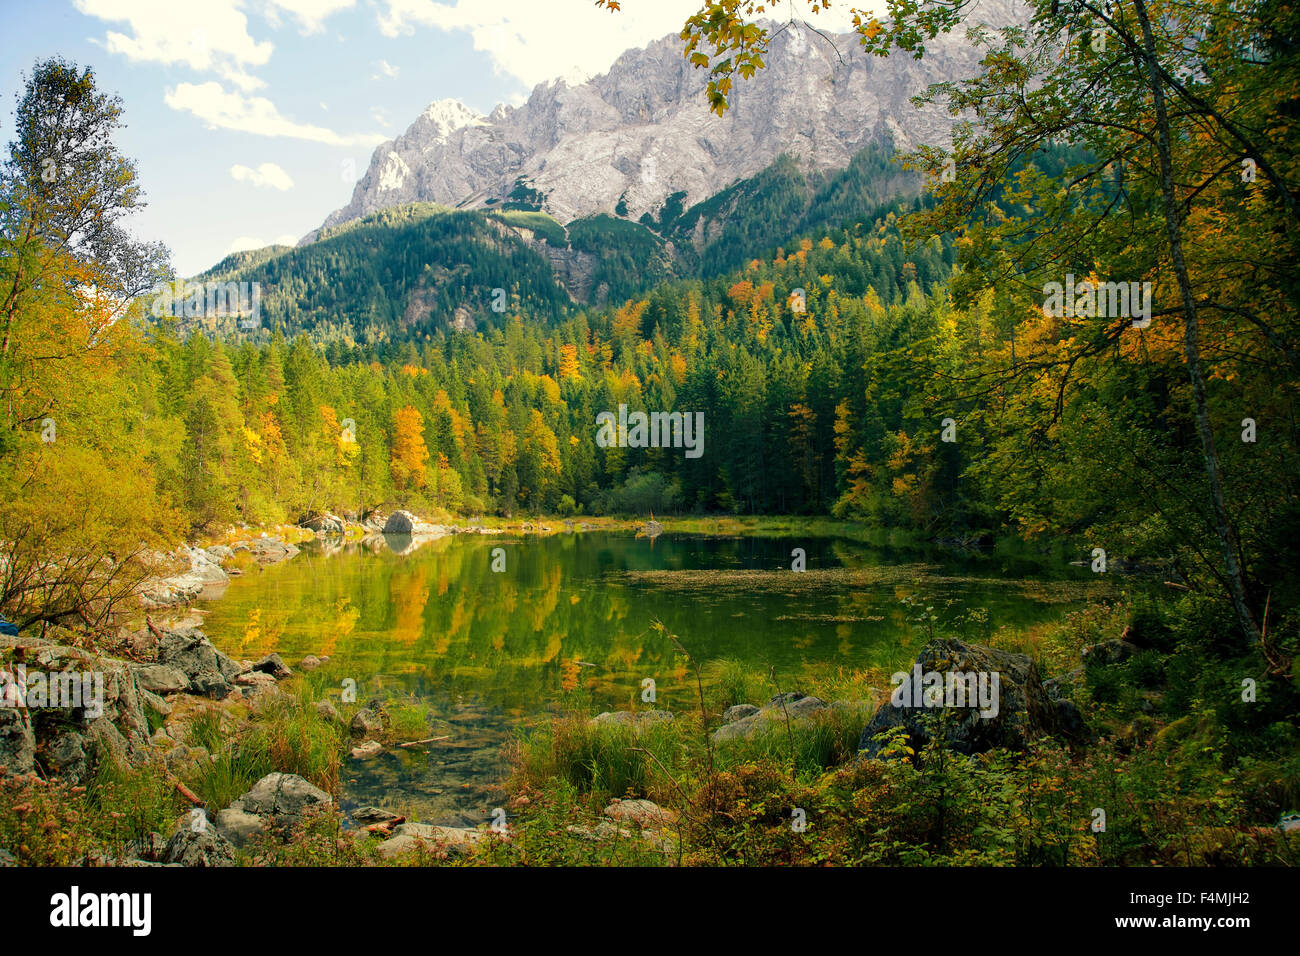 Peaceful little lake at the foot of the Bavarian Alps, Germany. Stock Photo